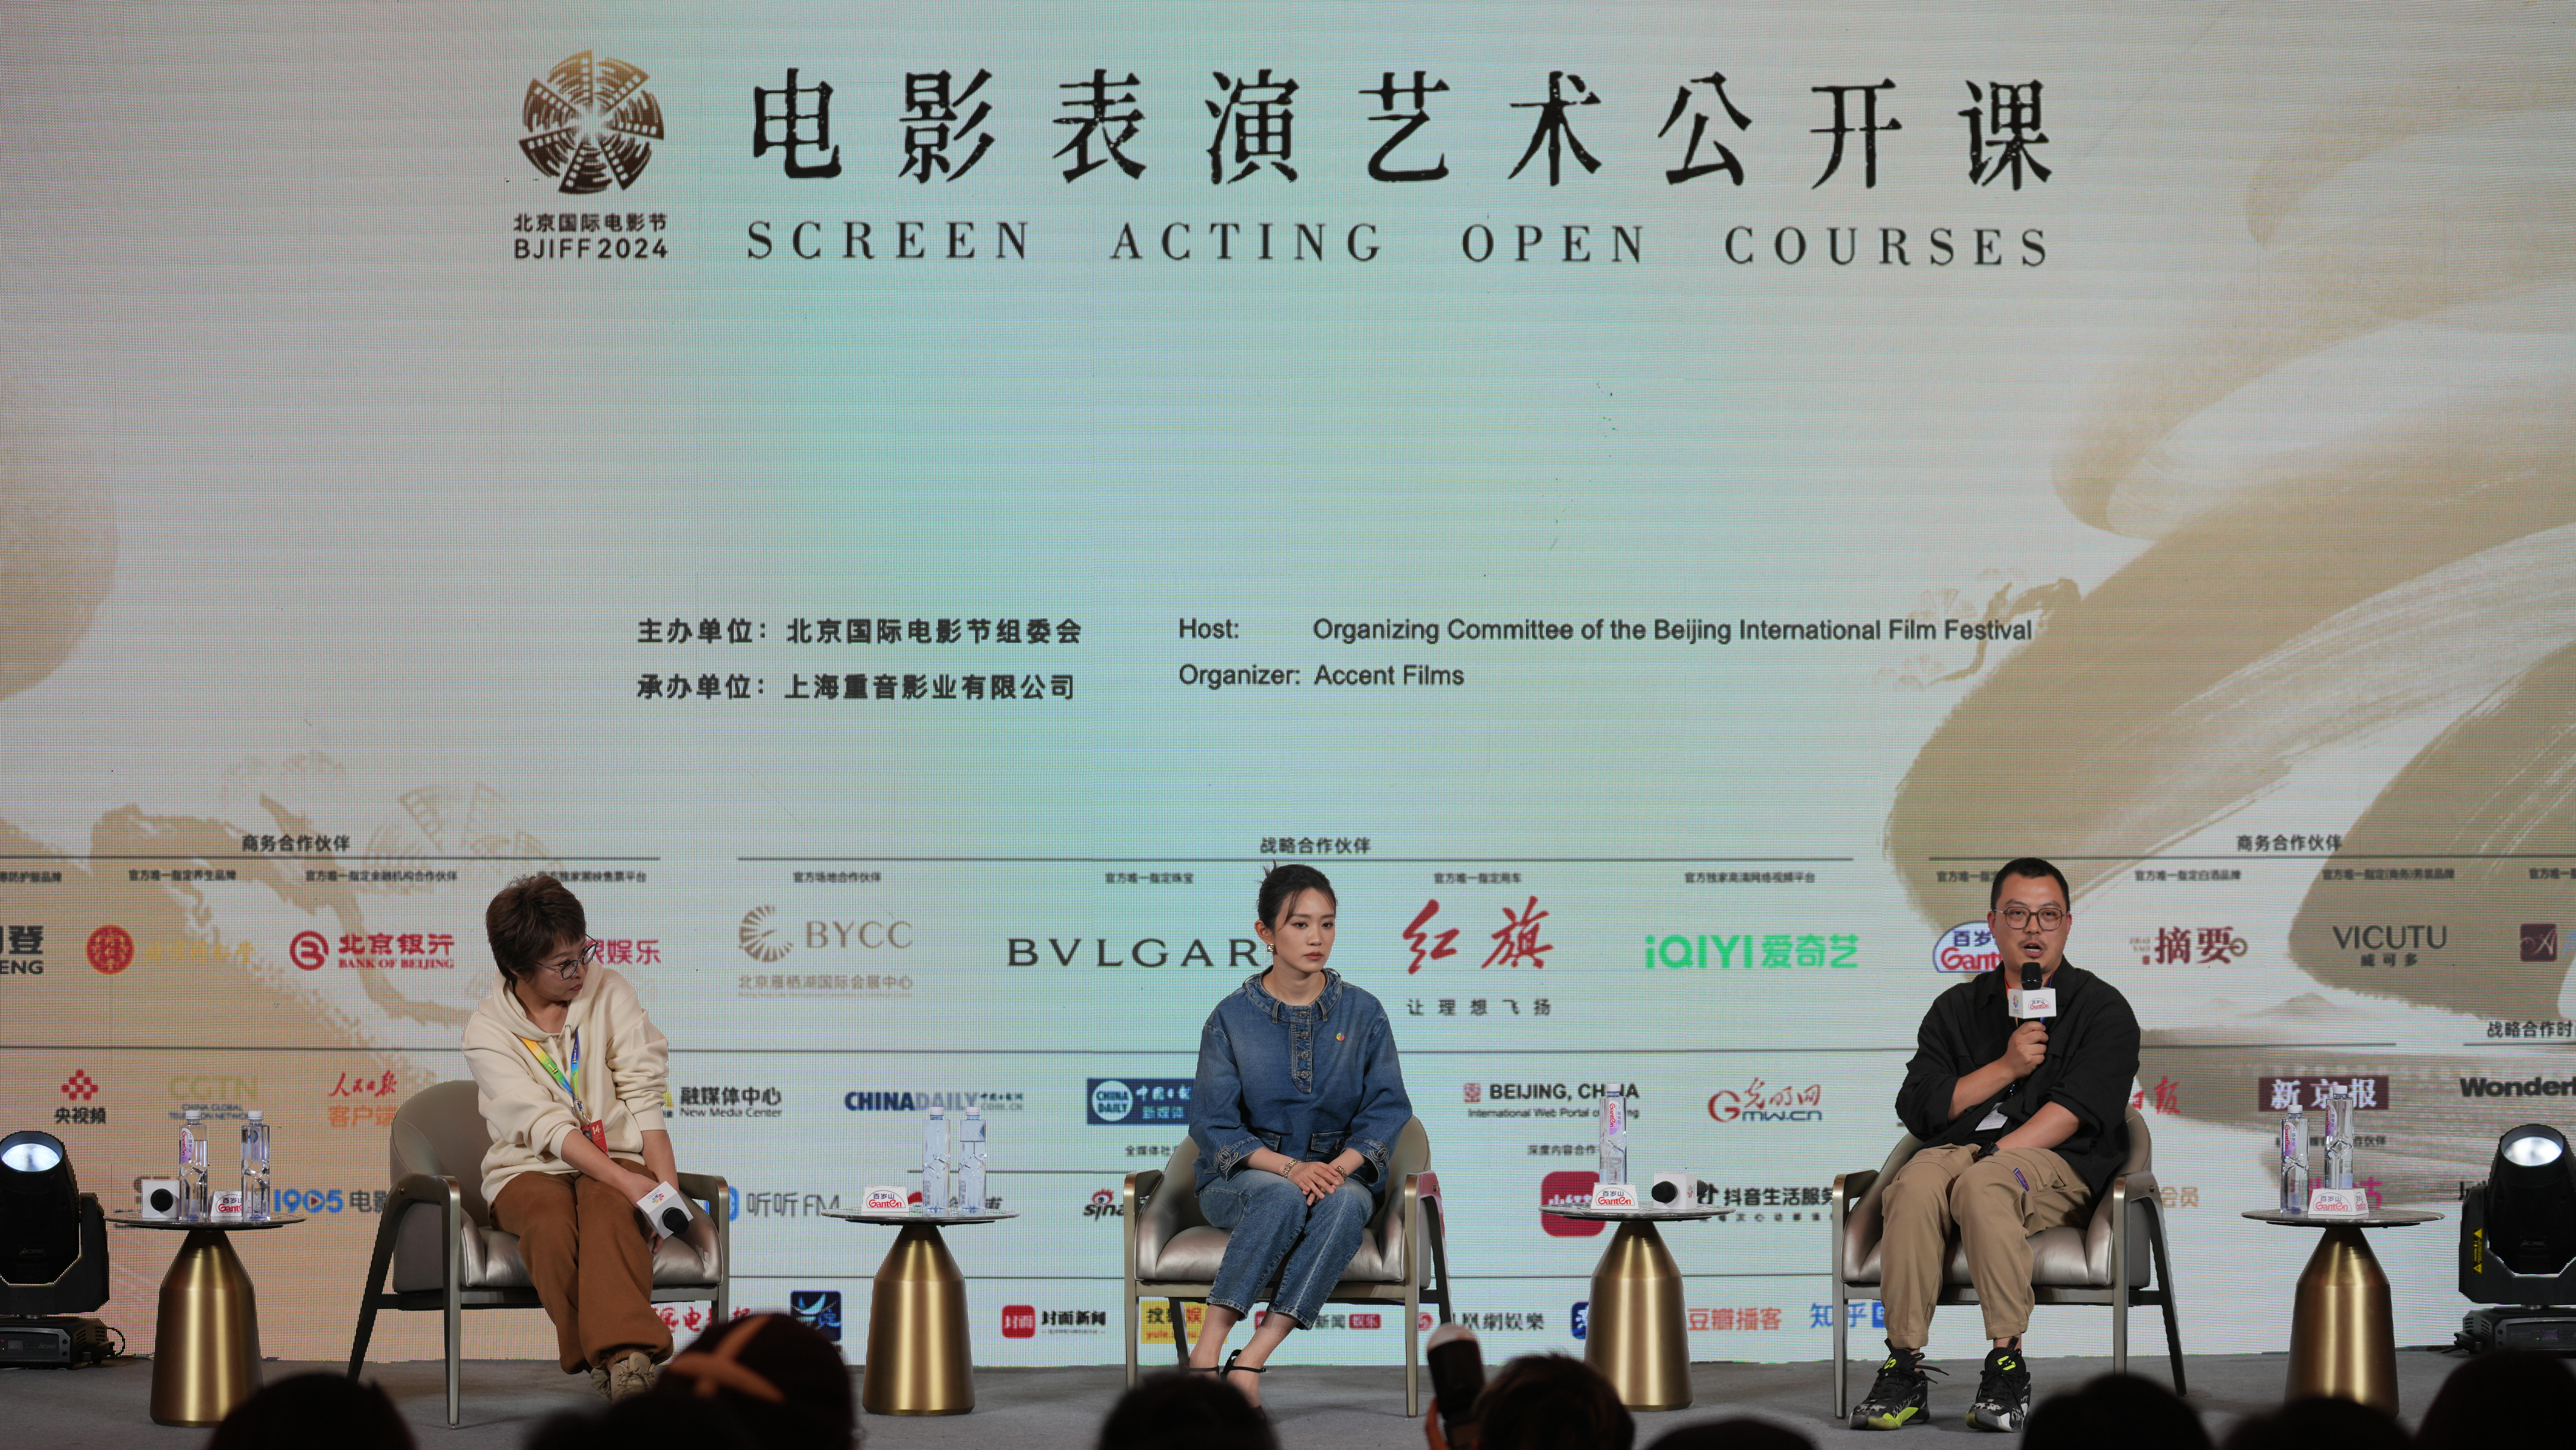 The conductors of a screen acting open course of the 14th Beijing International Film Festival in Beijing, China, April 23, 2024. Chen Bo/CGTN